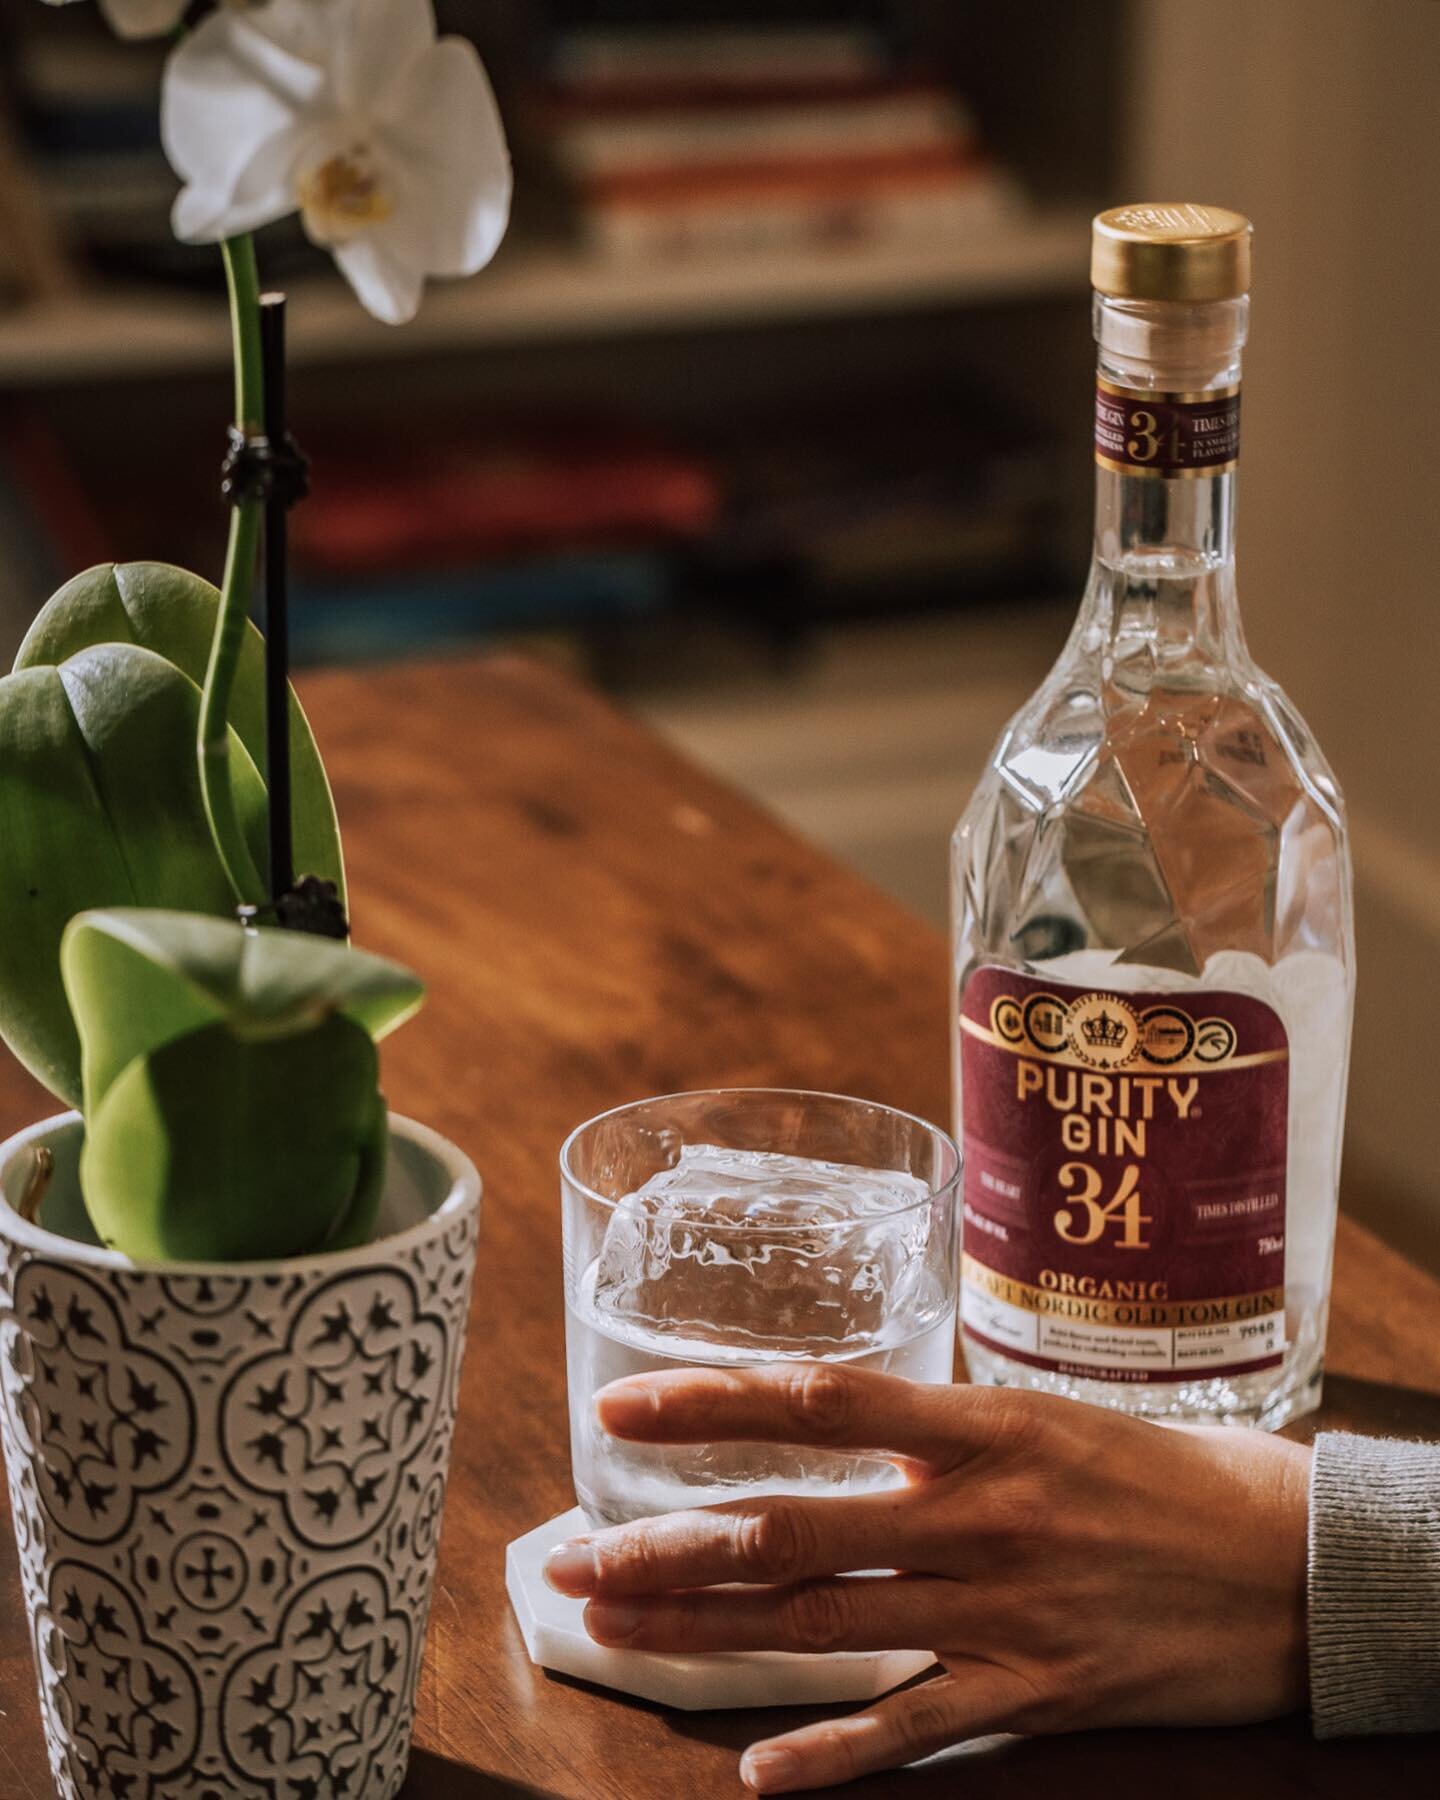 In our Old Tom Organic Gin, the smoothness you love from Purity is complimented by notes of juniper, thyme, basil, with the lingering sweetness of Nordic blueberry and lingonberry. Enjoy it on a rock or in your favorite gin cocktail for a pleasant sp